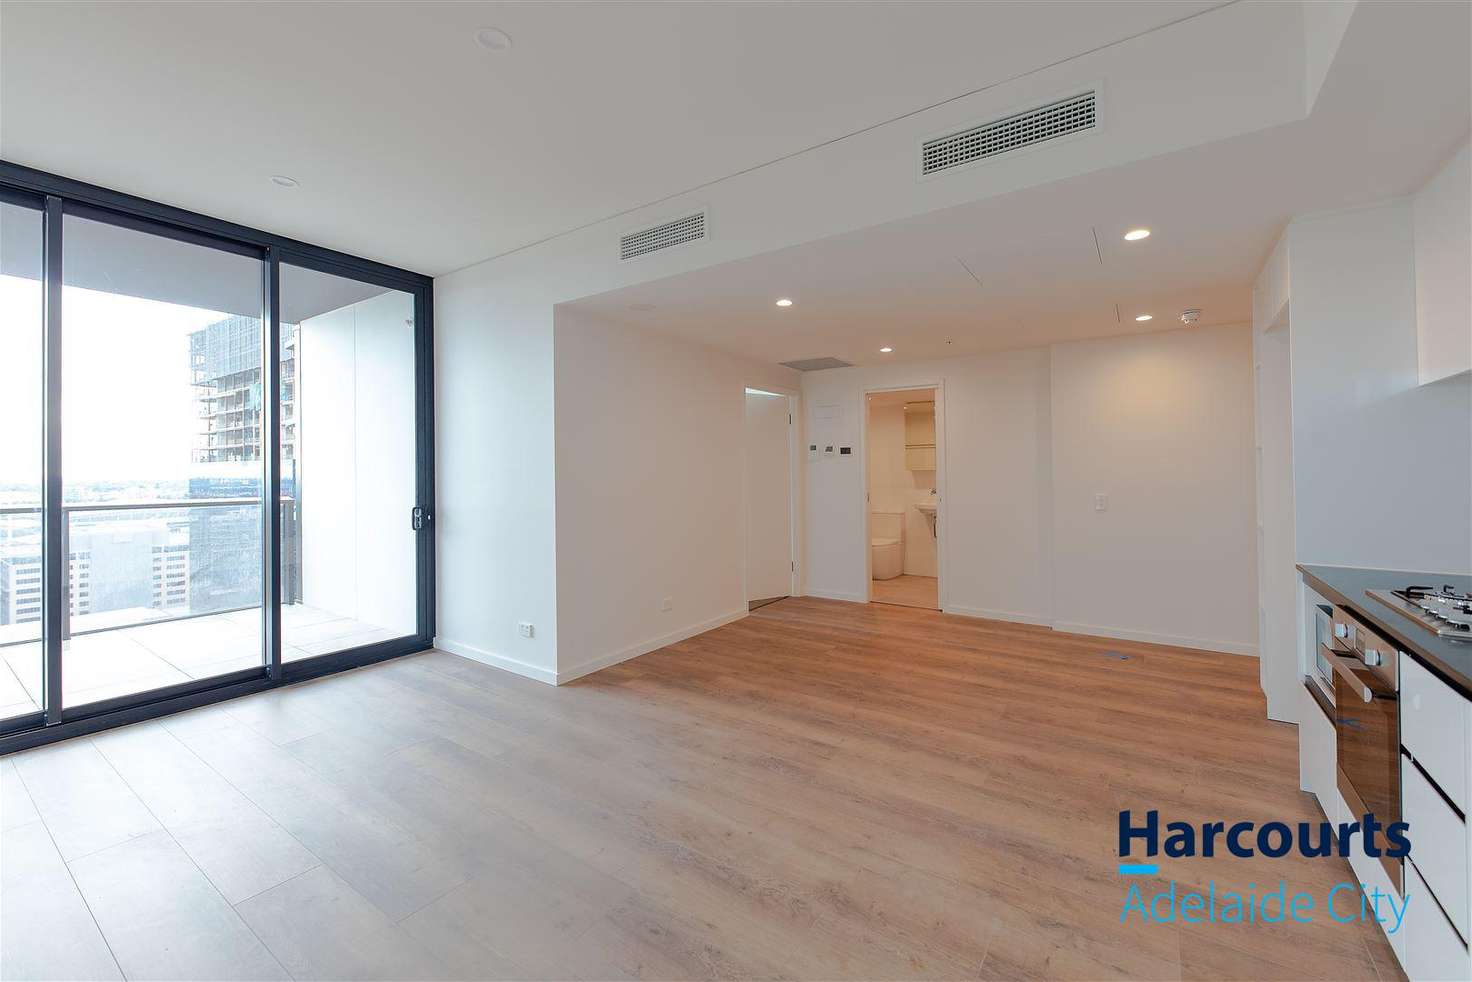 Main view of Homely apartment listing, 2 Bedroom/116 Waymouth Street, Adelaide SA 5000